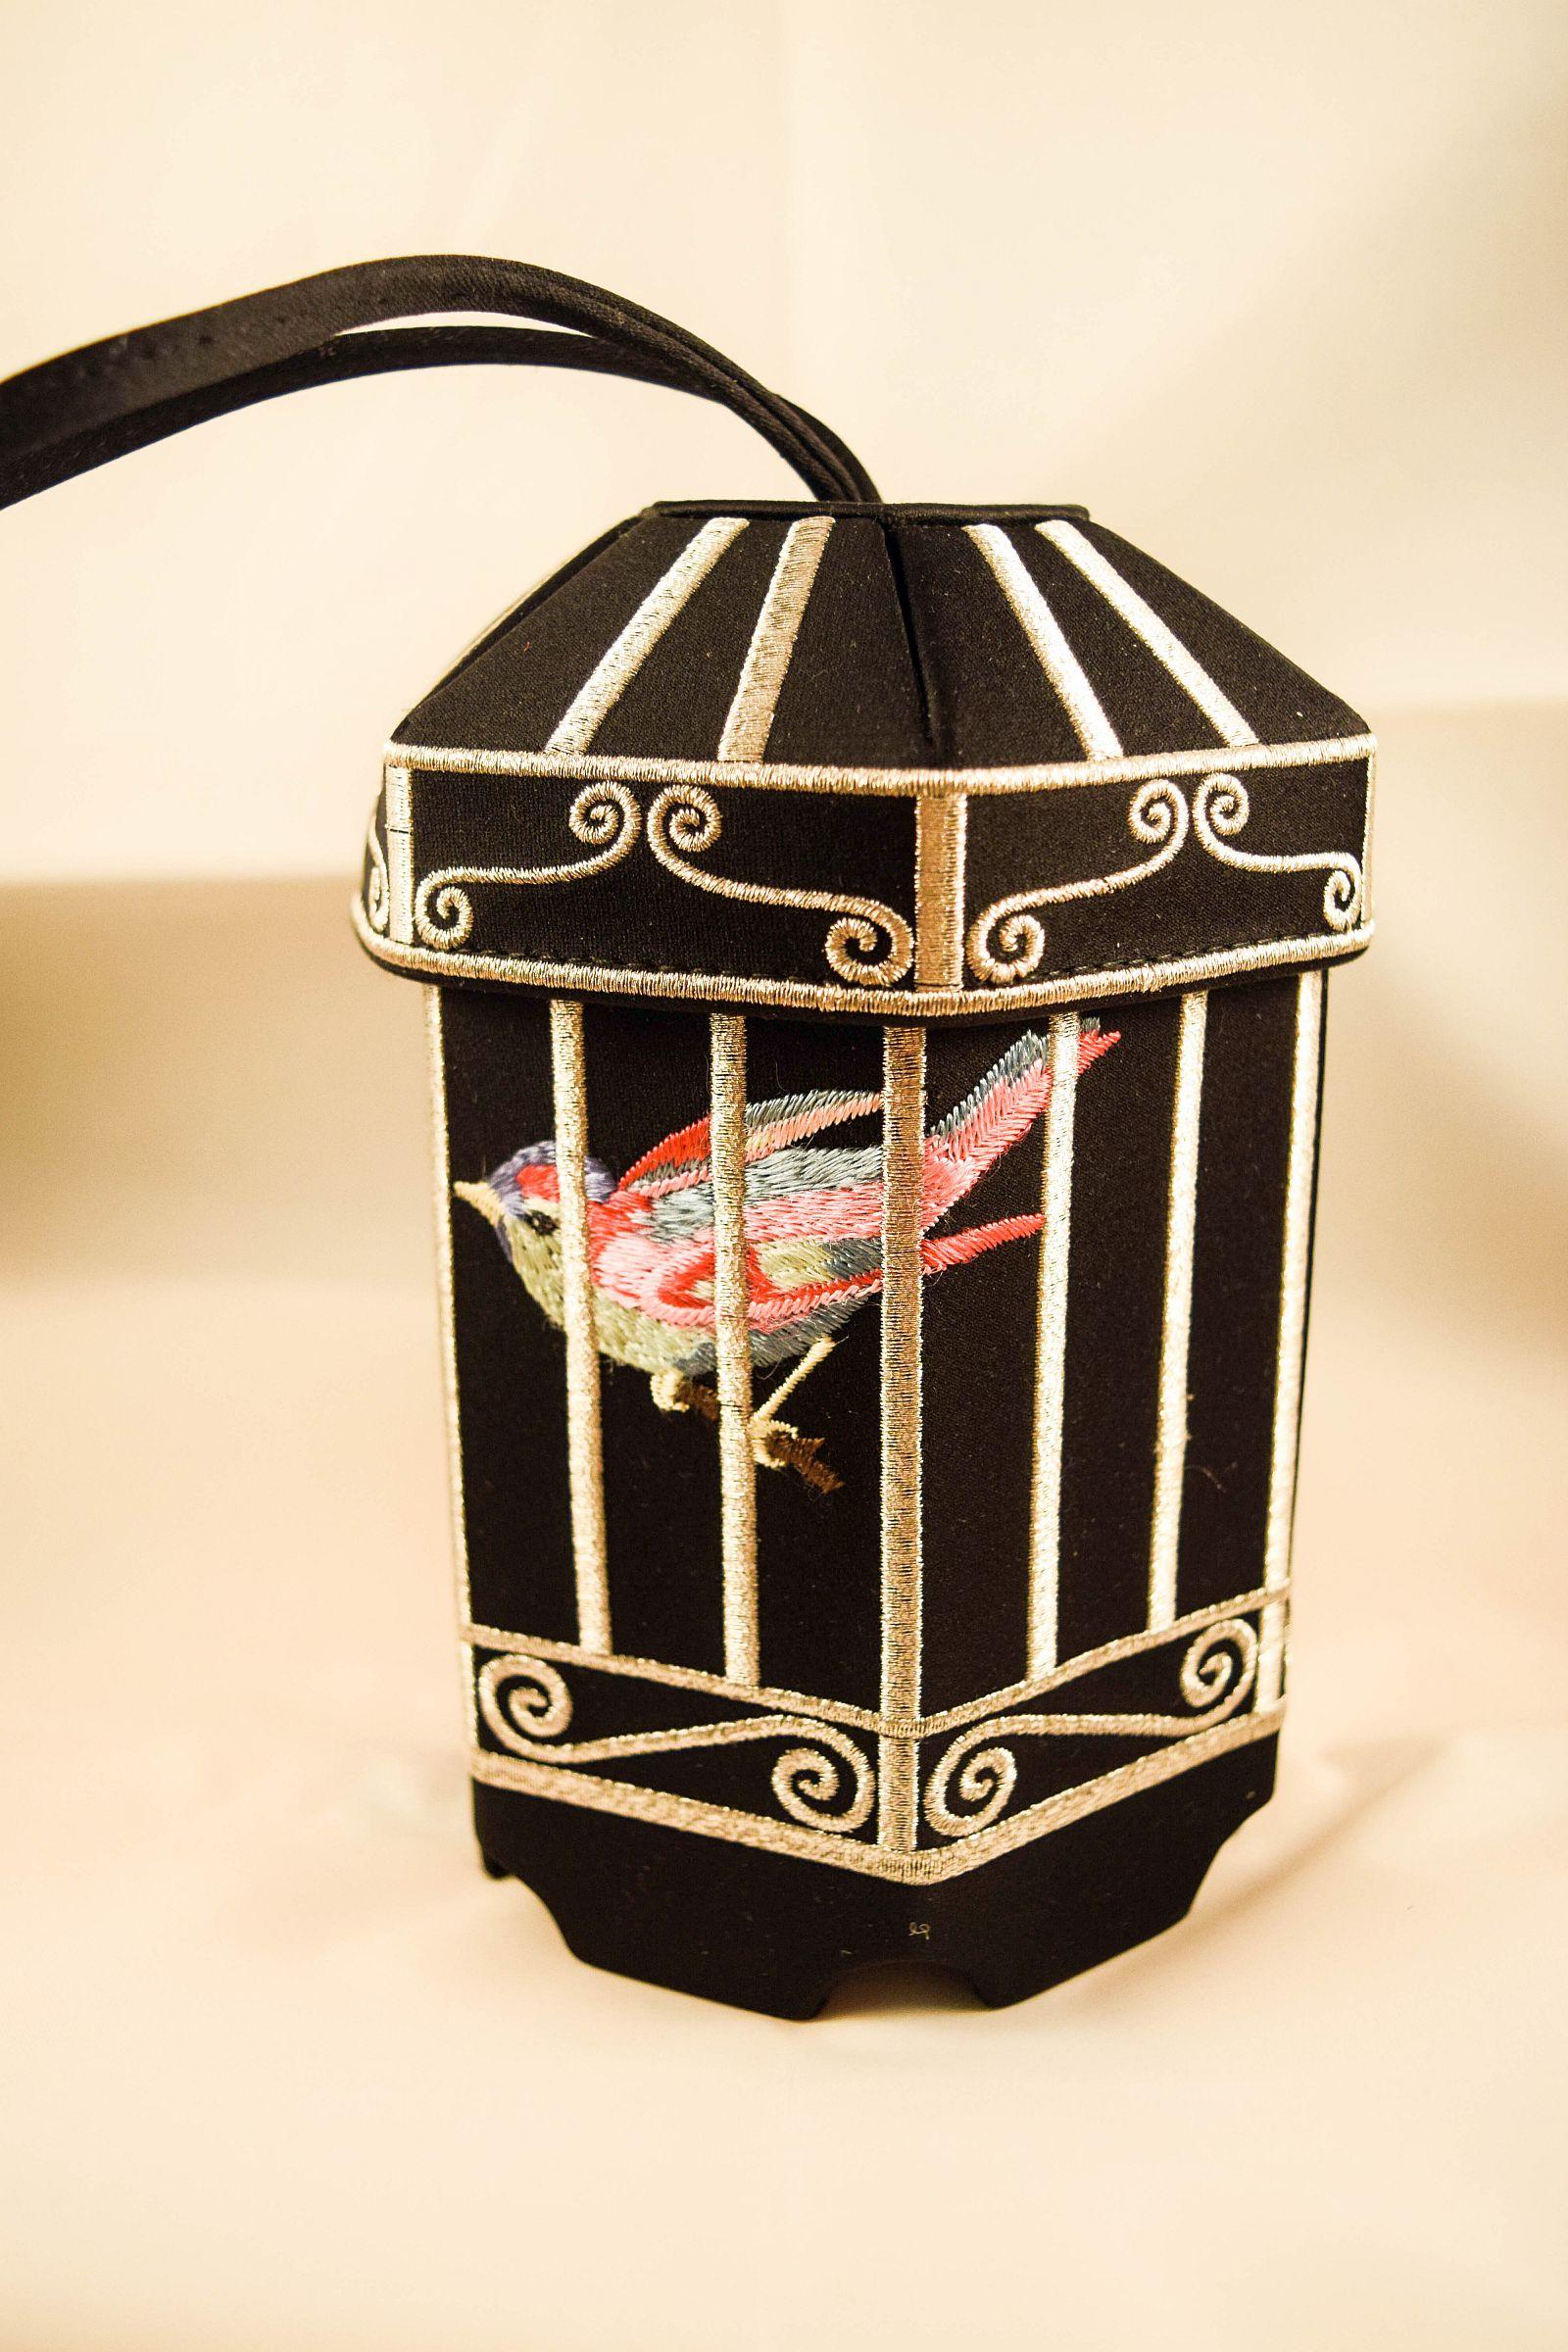 Wonderful Lulu Guiness Bird Cage extremely rare evening bag
They were a small production of 500 pieces.
Luckily our one survived in a fantastic original condition in it's inner and outer box 
with all the ribbons,tissue and card.
Unused new